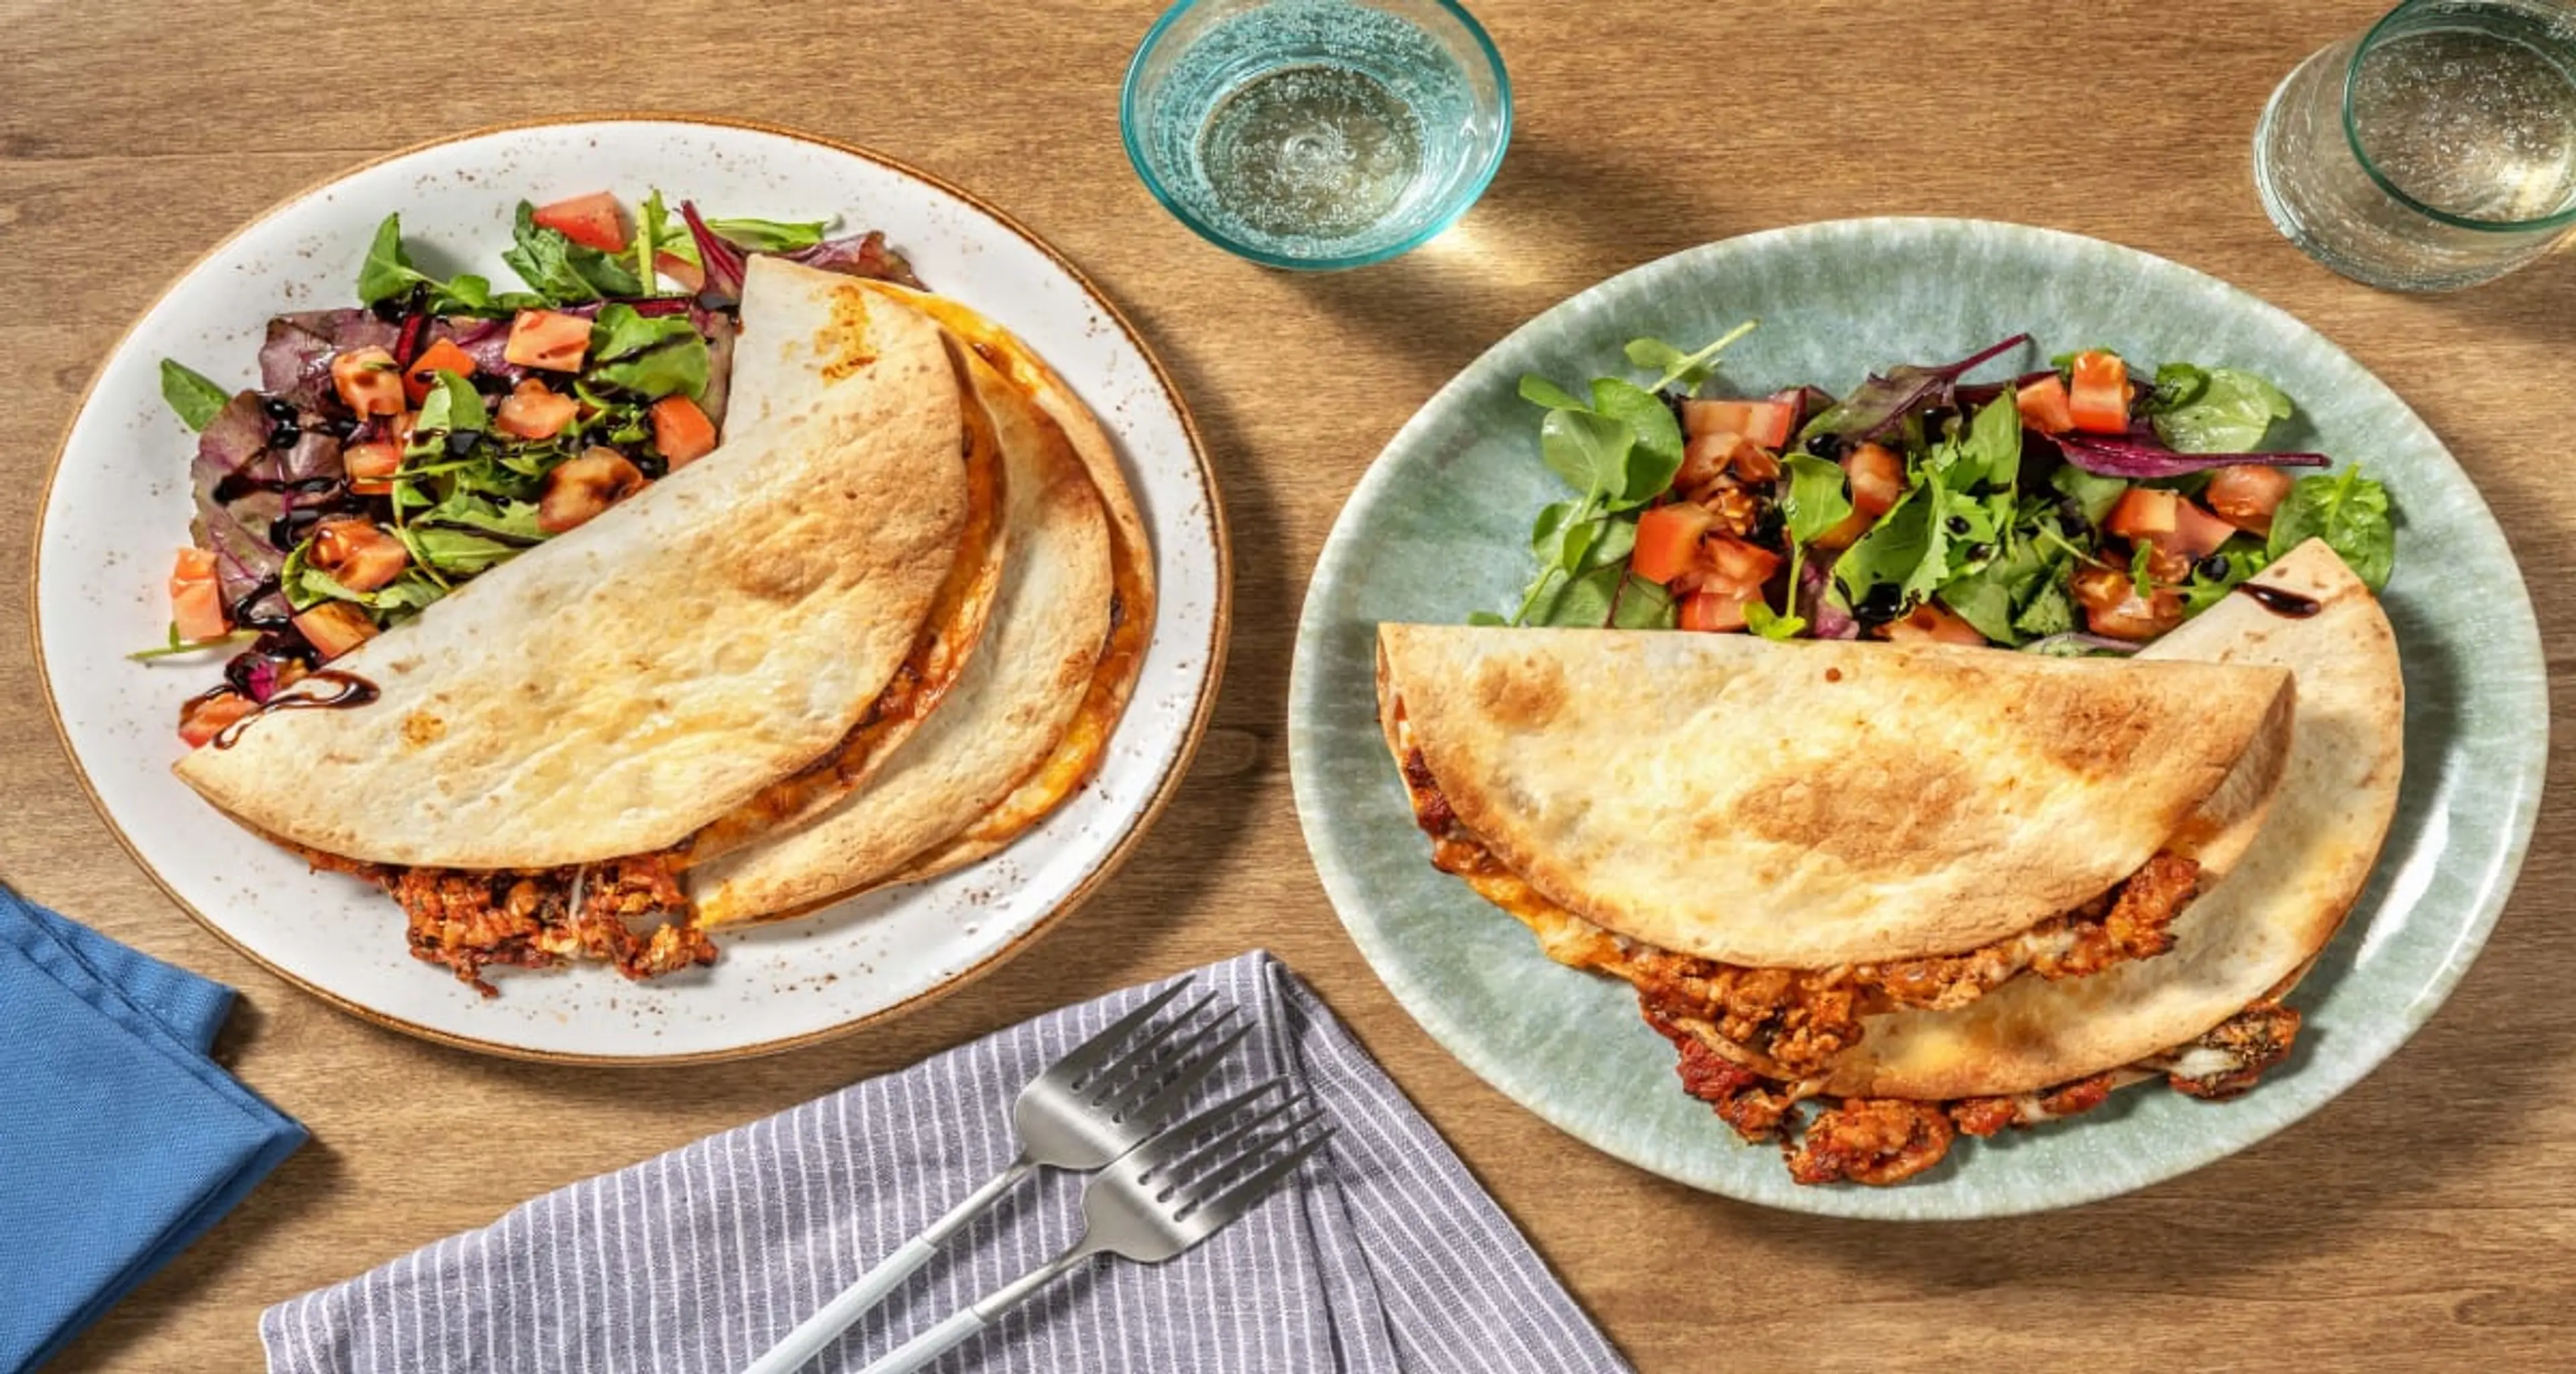 Pork Bolognese and Cheese Quesadillas with Balsamic Glazed B